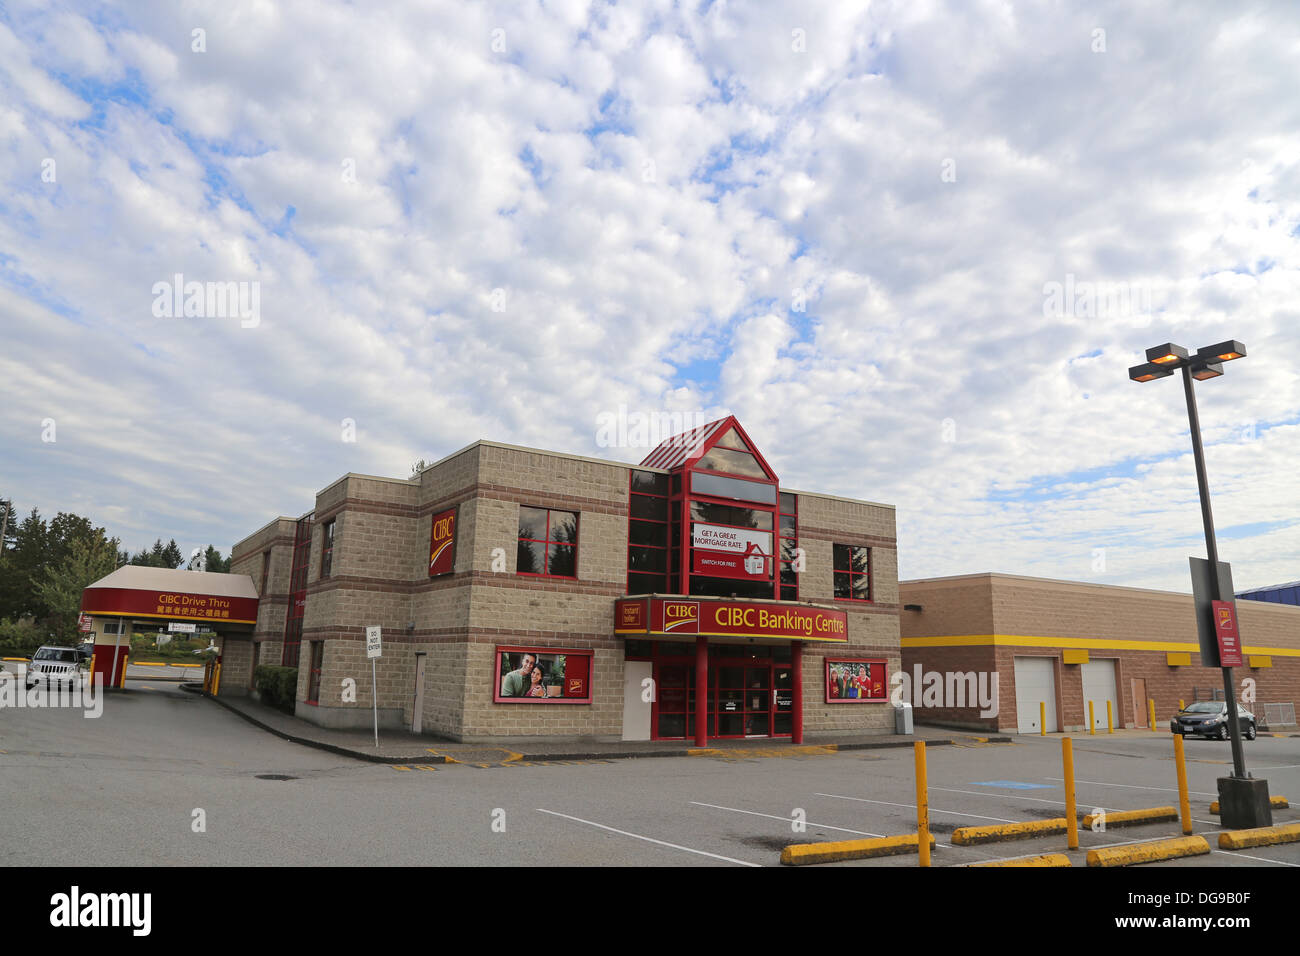 A retail outlet for CIBC bank Stock Photo